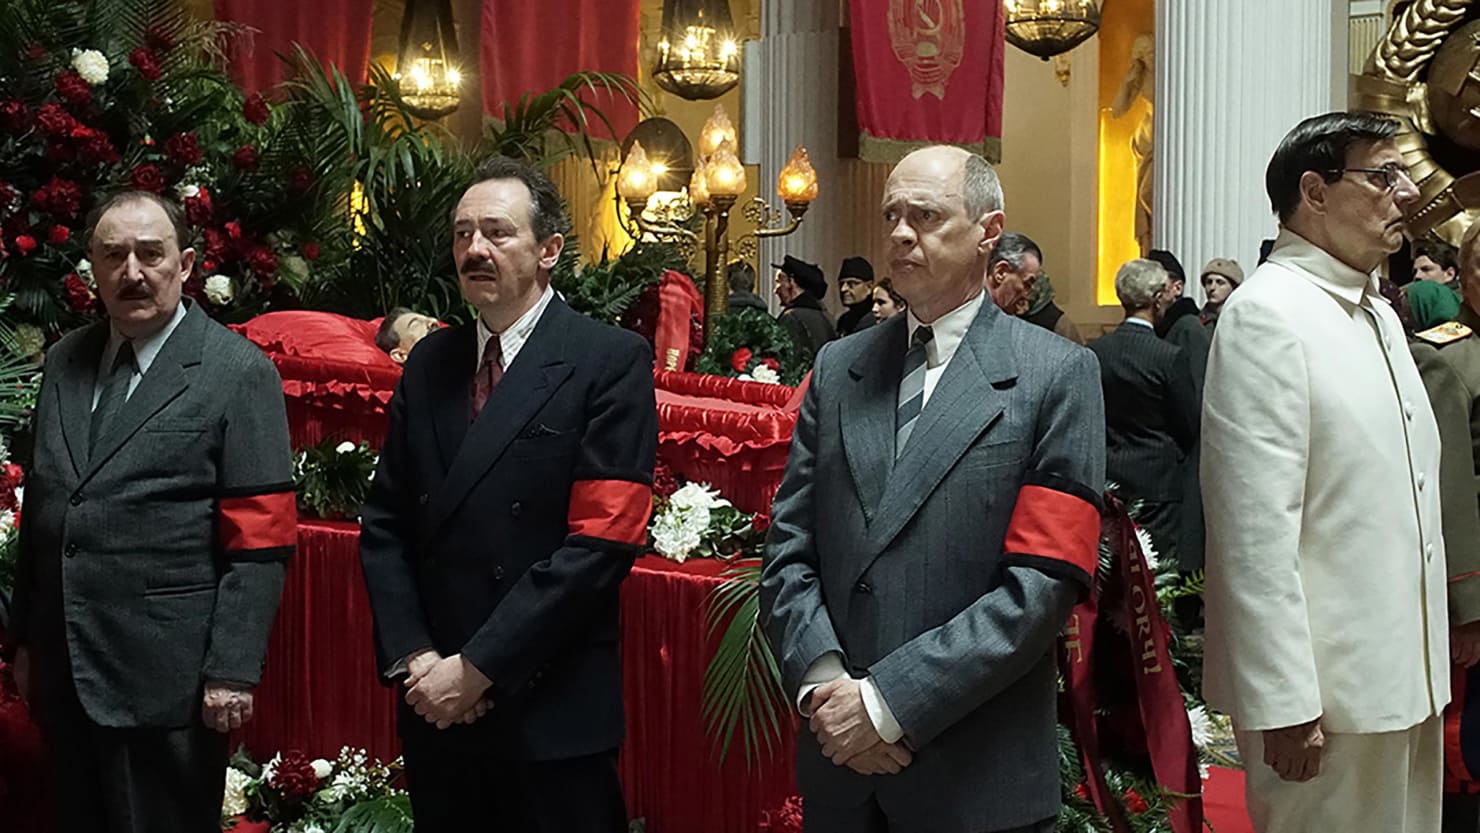 THE DEATH OF STALIN 2